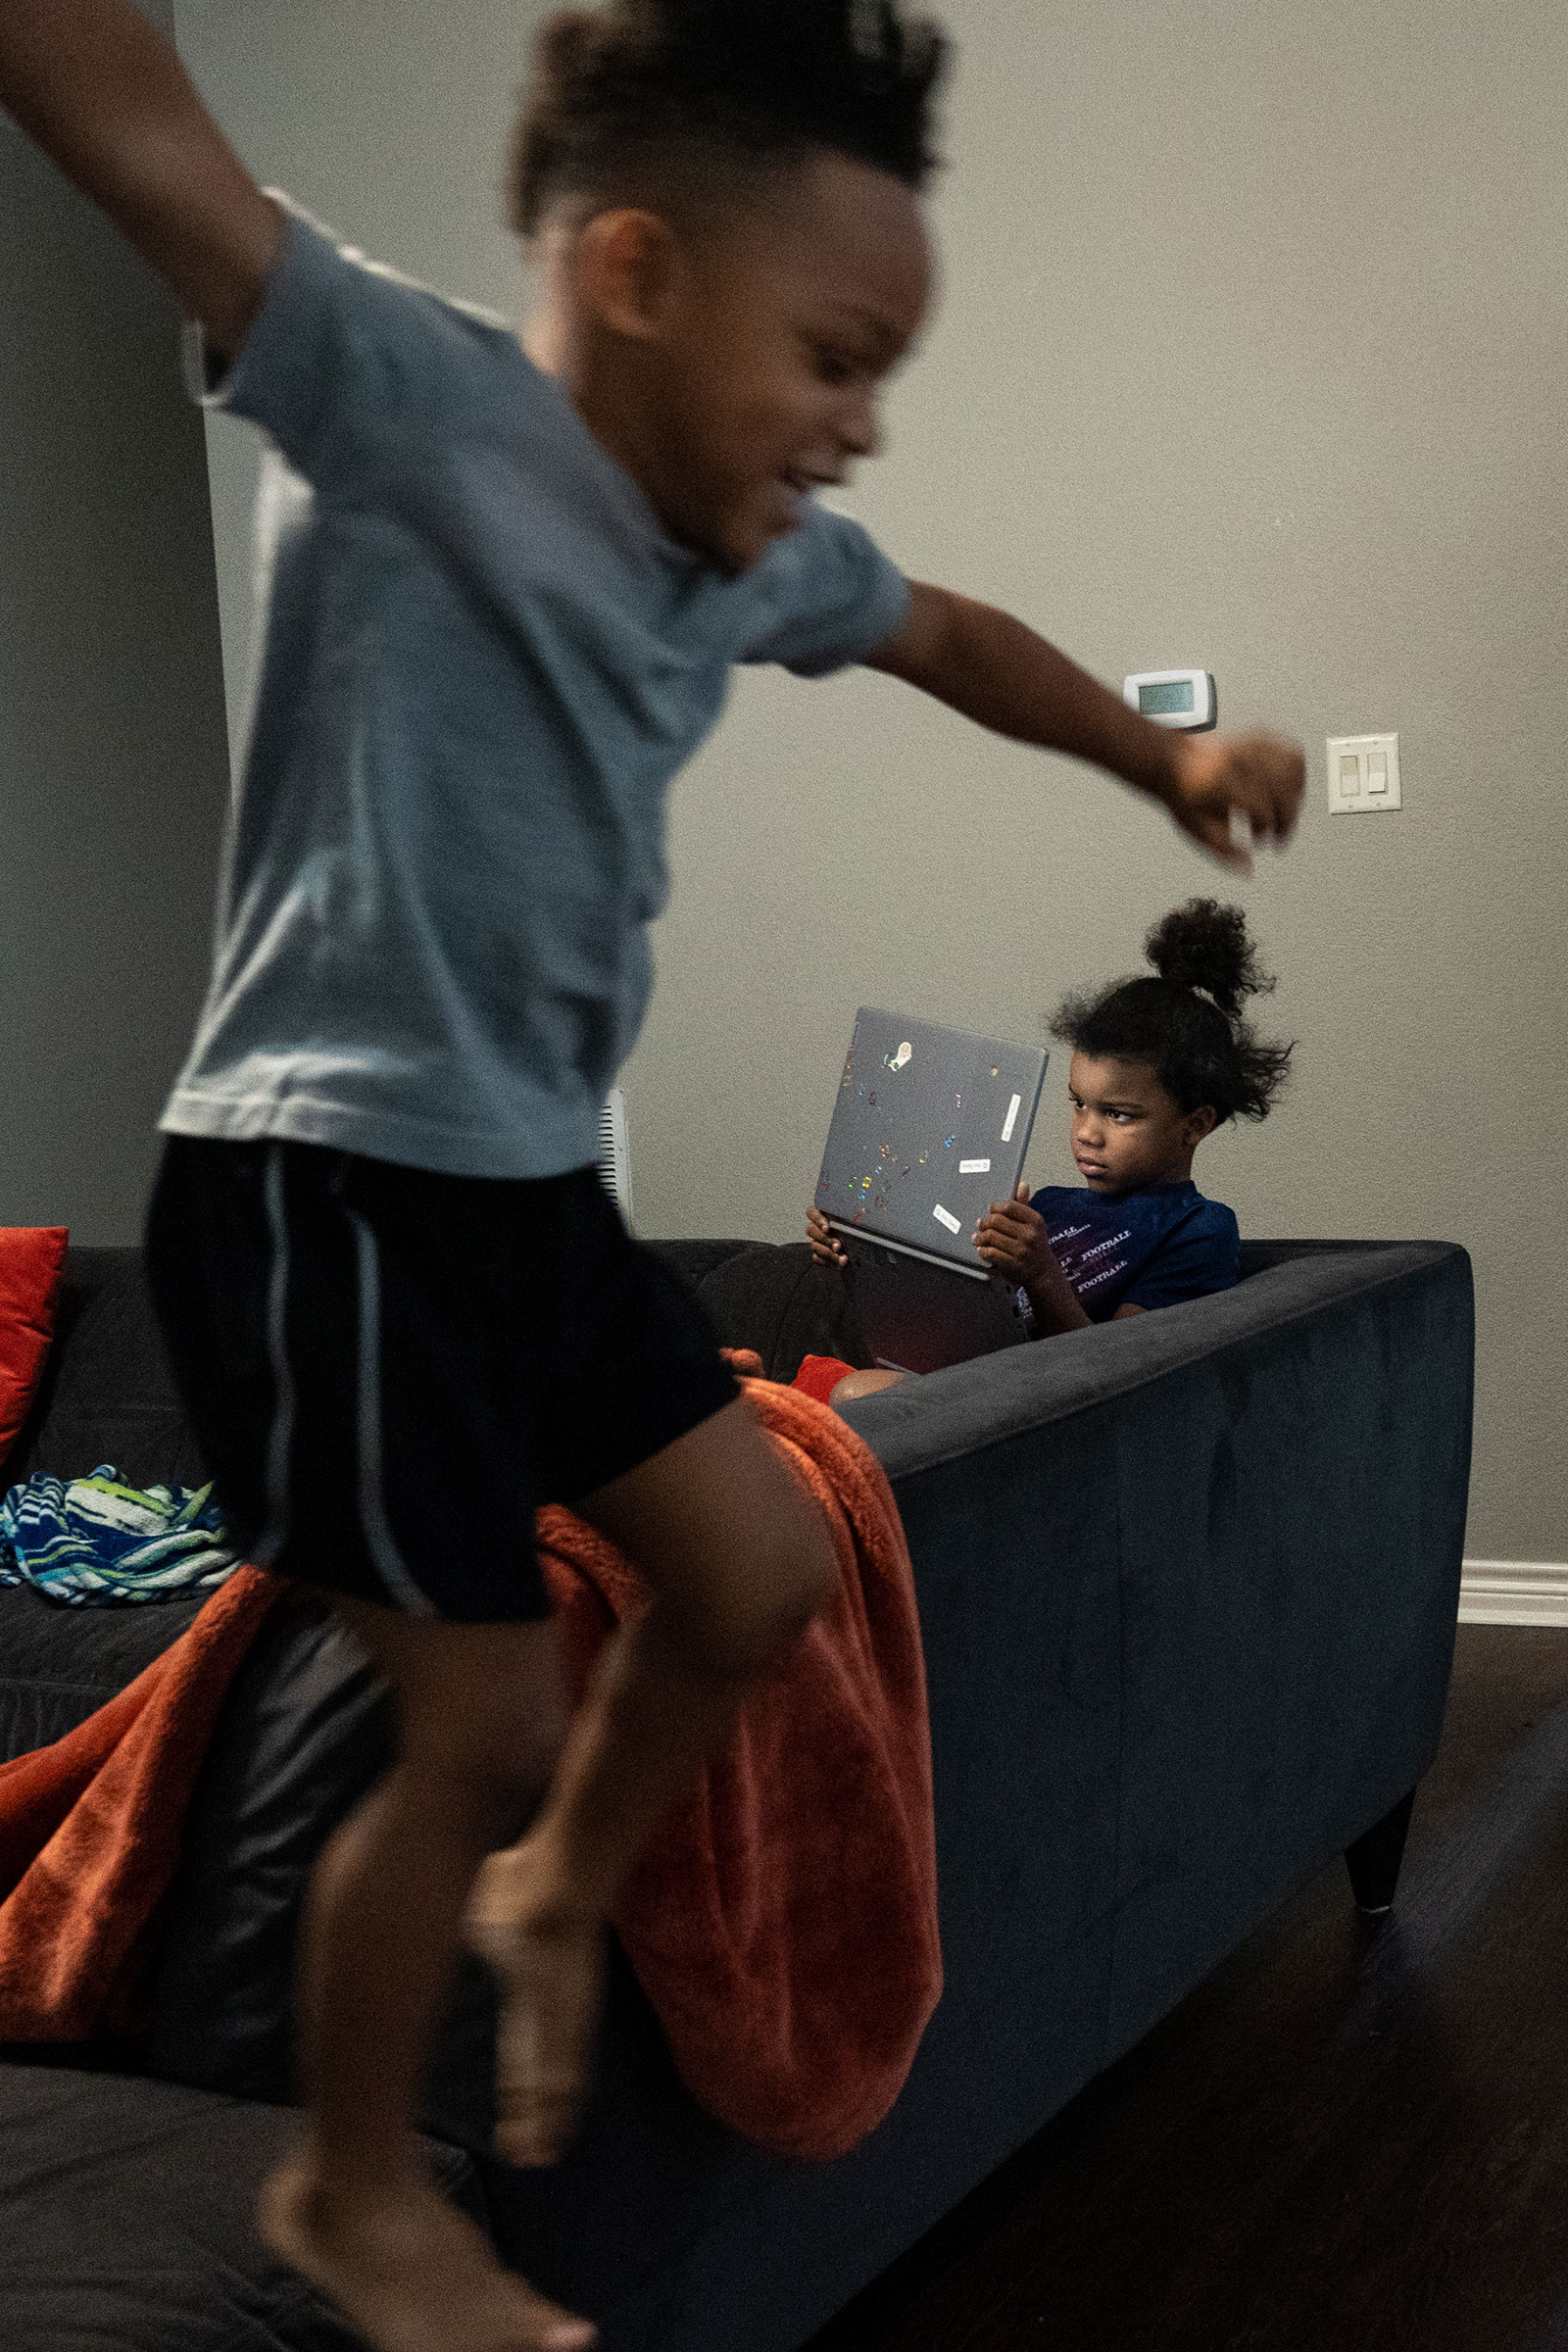 RICHARDSON, TEXAS - February 23, 2022: Brax, 6, studies his laptop as his younger brother Blaine, 4, jumps off the sofa. Ilana Panich-Linsman for TIME